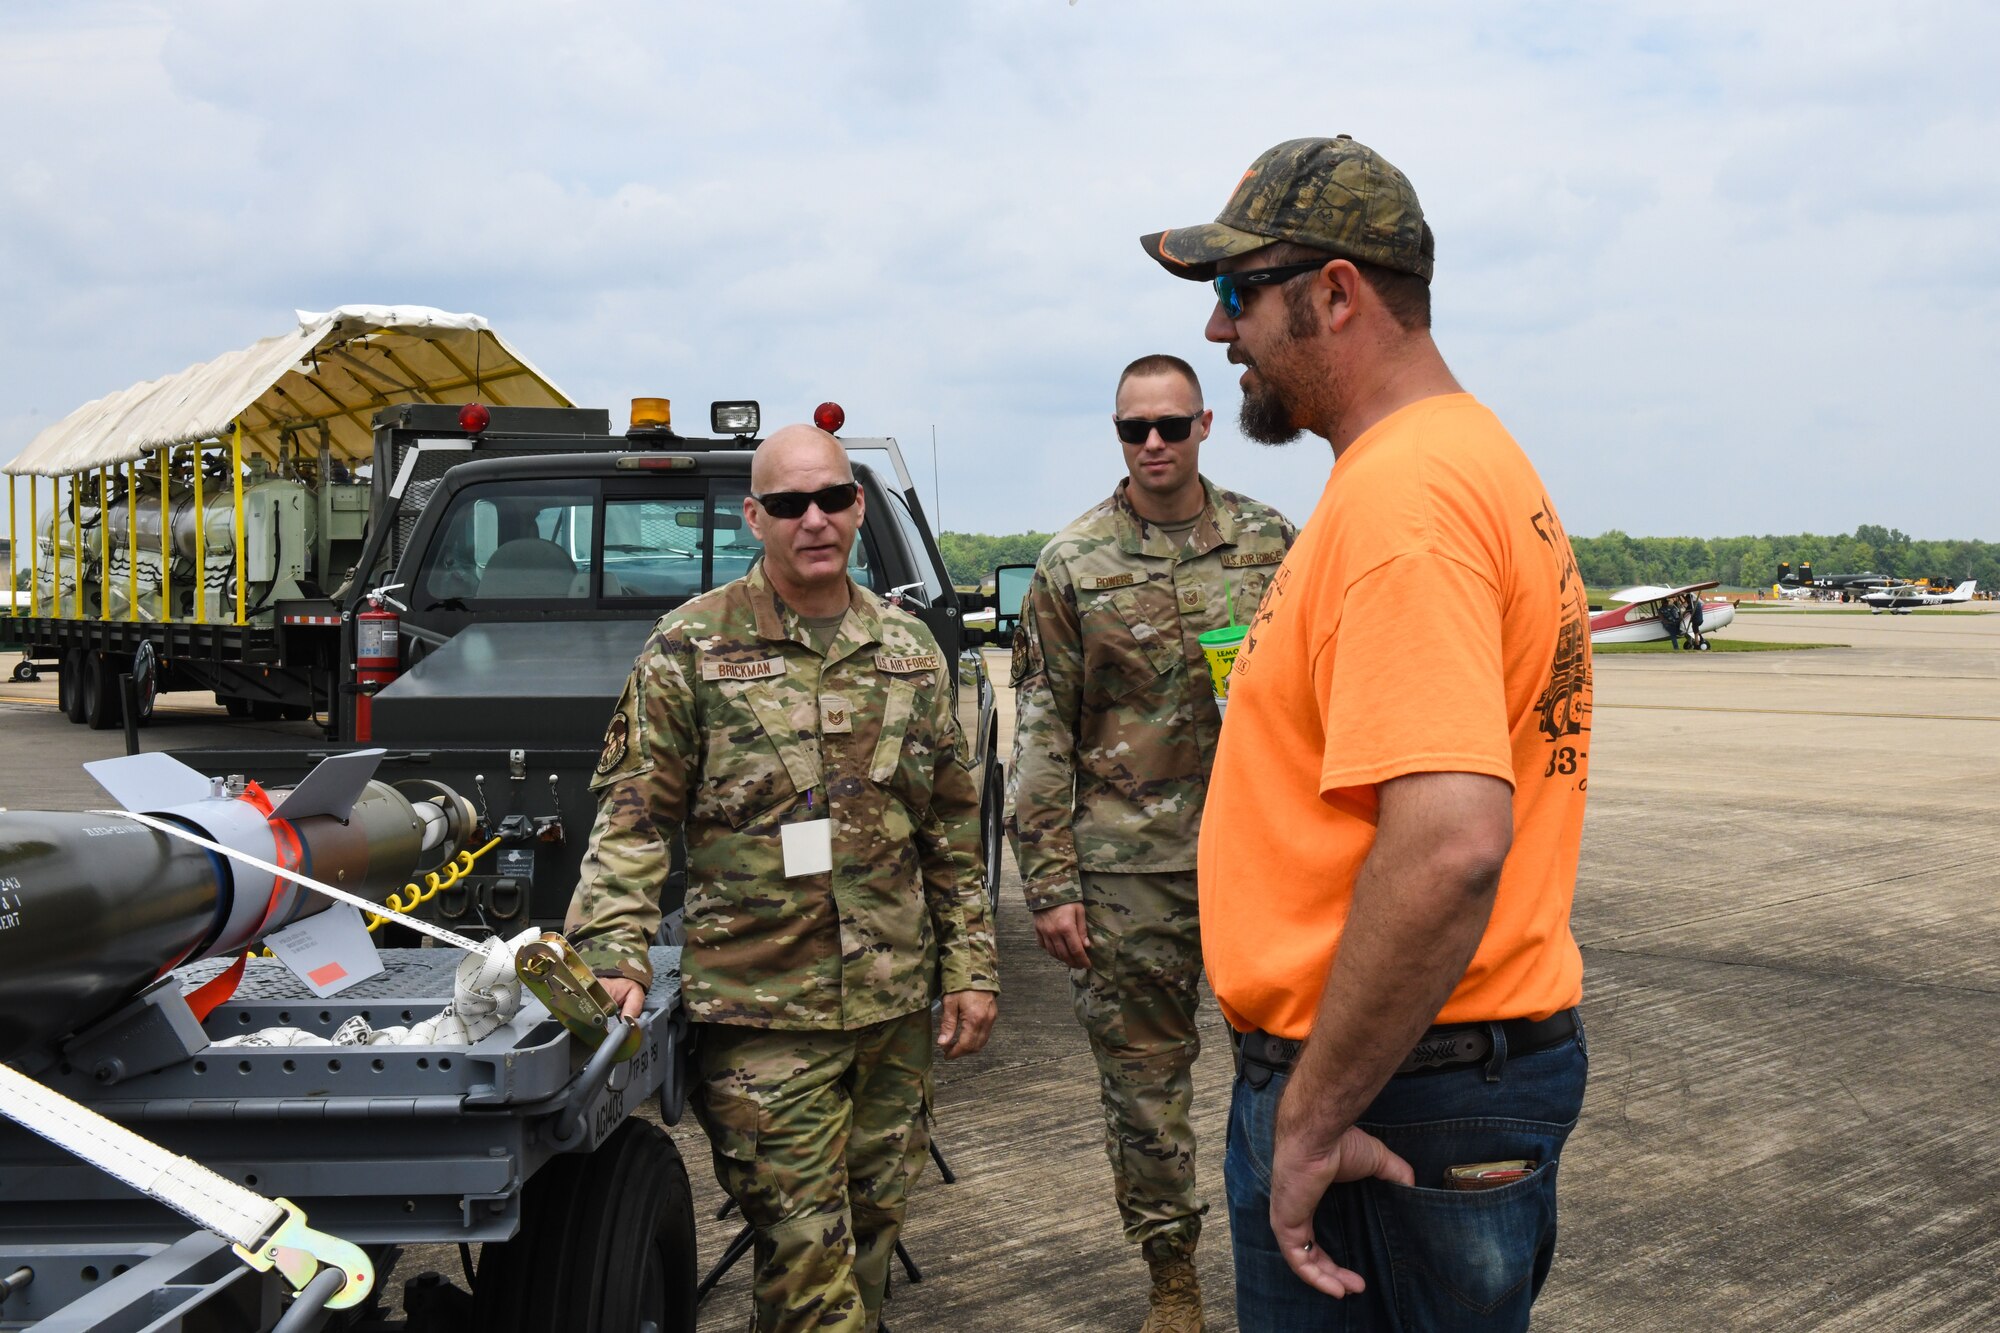 Tech. Sgt. John Brickman (left), a munition storage technician, and Tech. Sgt. Hunter Powers (middle) NCOIC of munitions operations, both assigned to the 910th Maintenance Squadron, talks with event guests, Aug. 6, 2023, at the Wings and Wheels Fly-In and Car Show at Youngstown-Warren Regional Airport, Ohio.